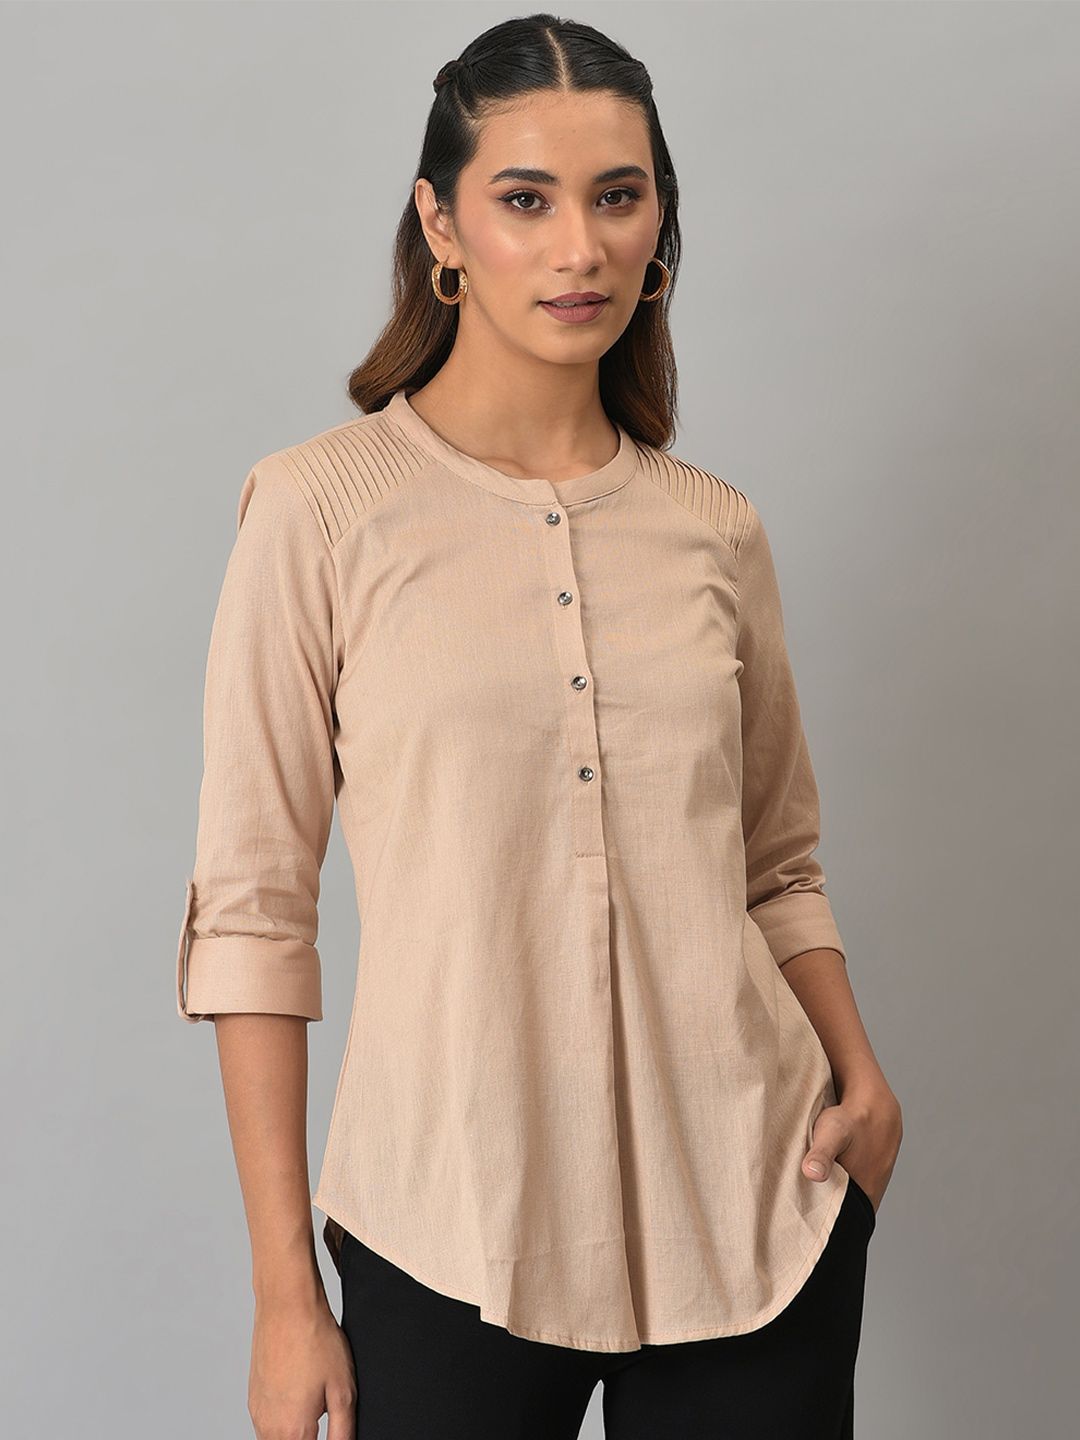 W Beige Cotton Roll-Up Sleeves Top Price in India